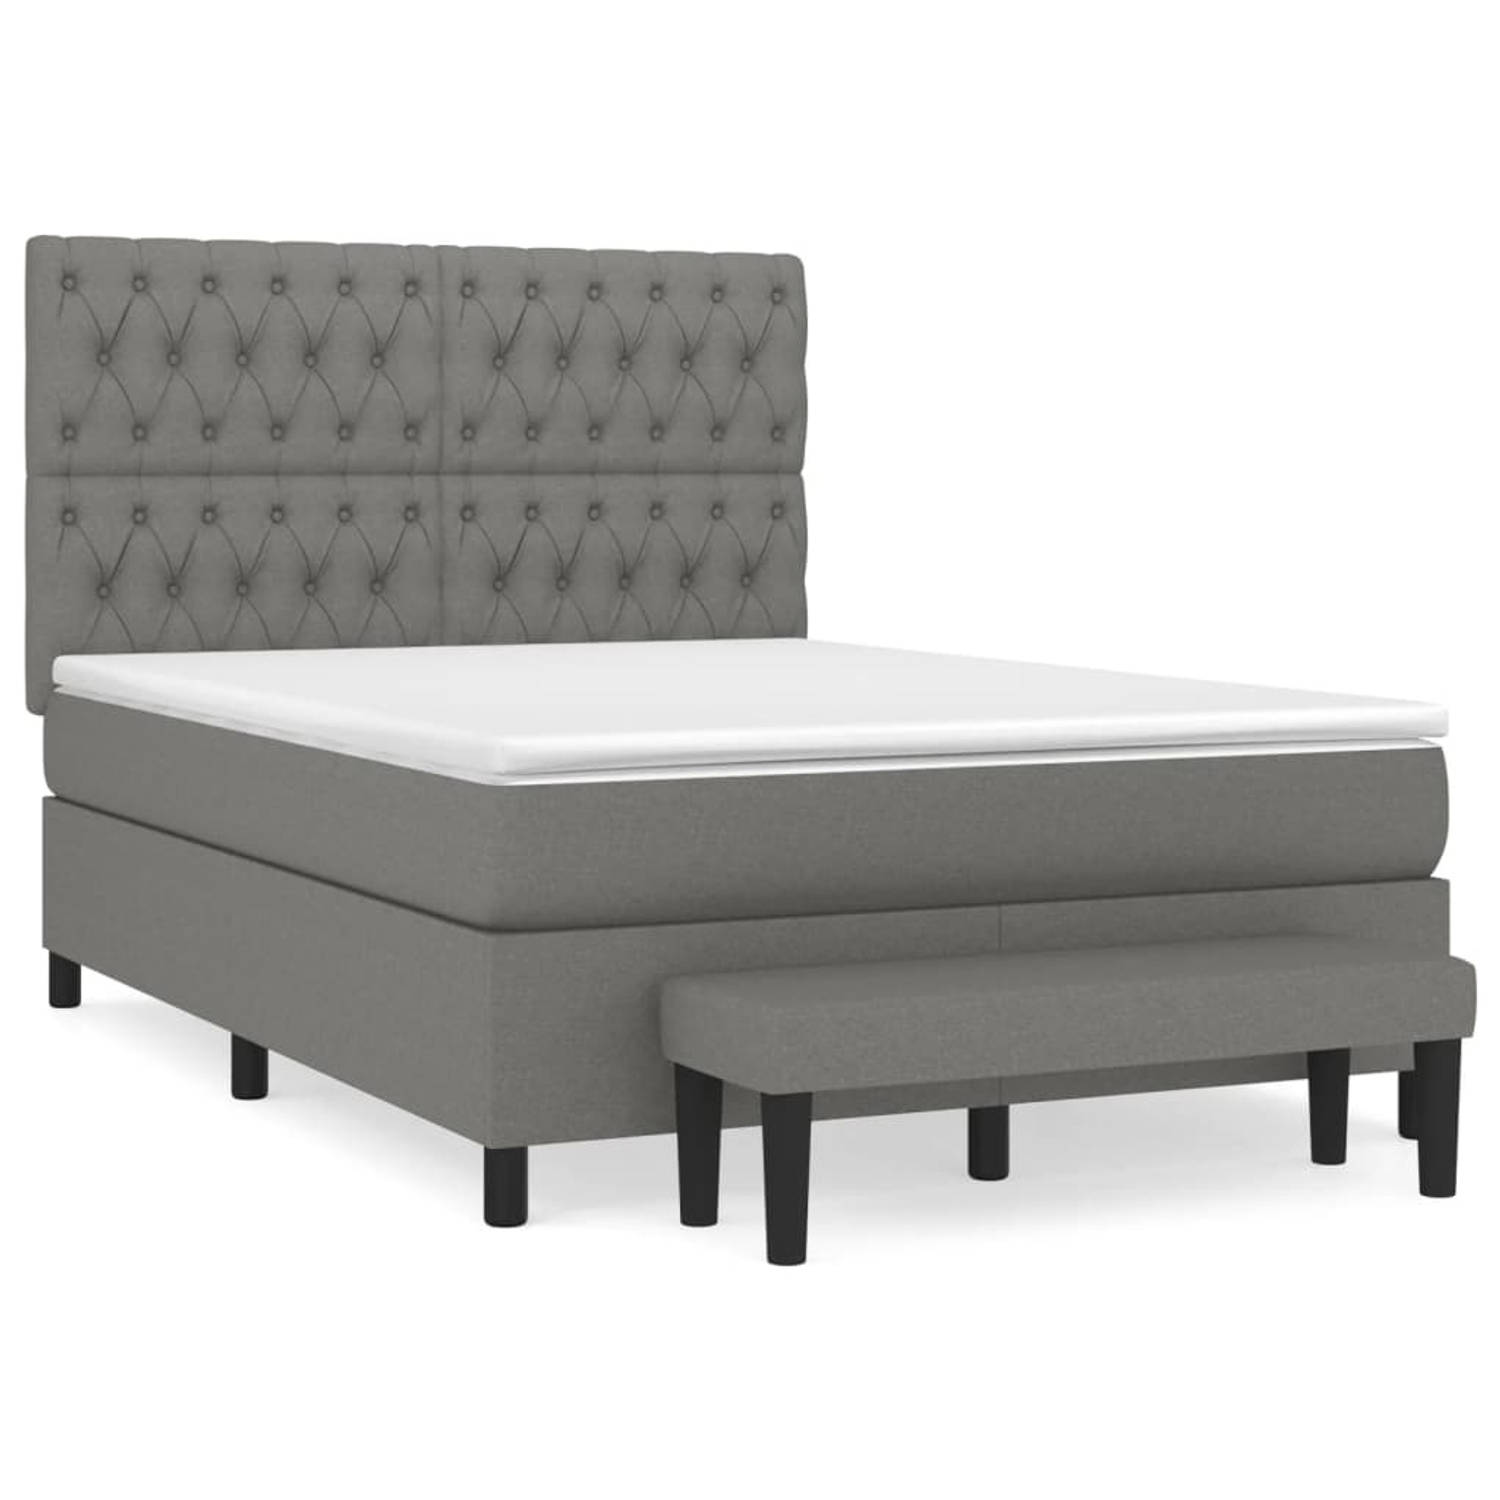 The Living Store Boxspringbed - Comfort Sleep - Bed - 193 x 144 x 118/128 cm - Donkergrijs